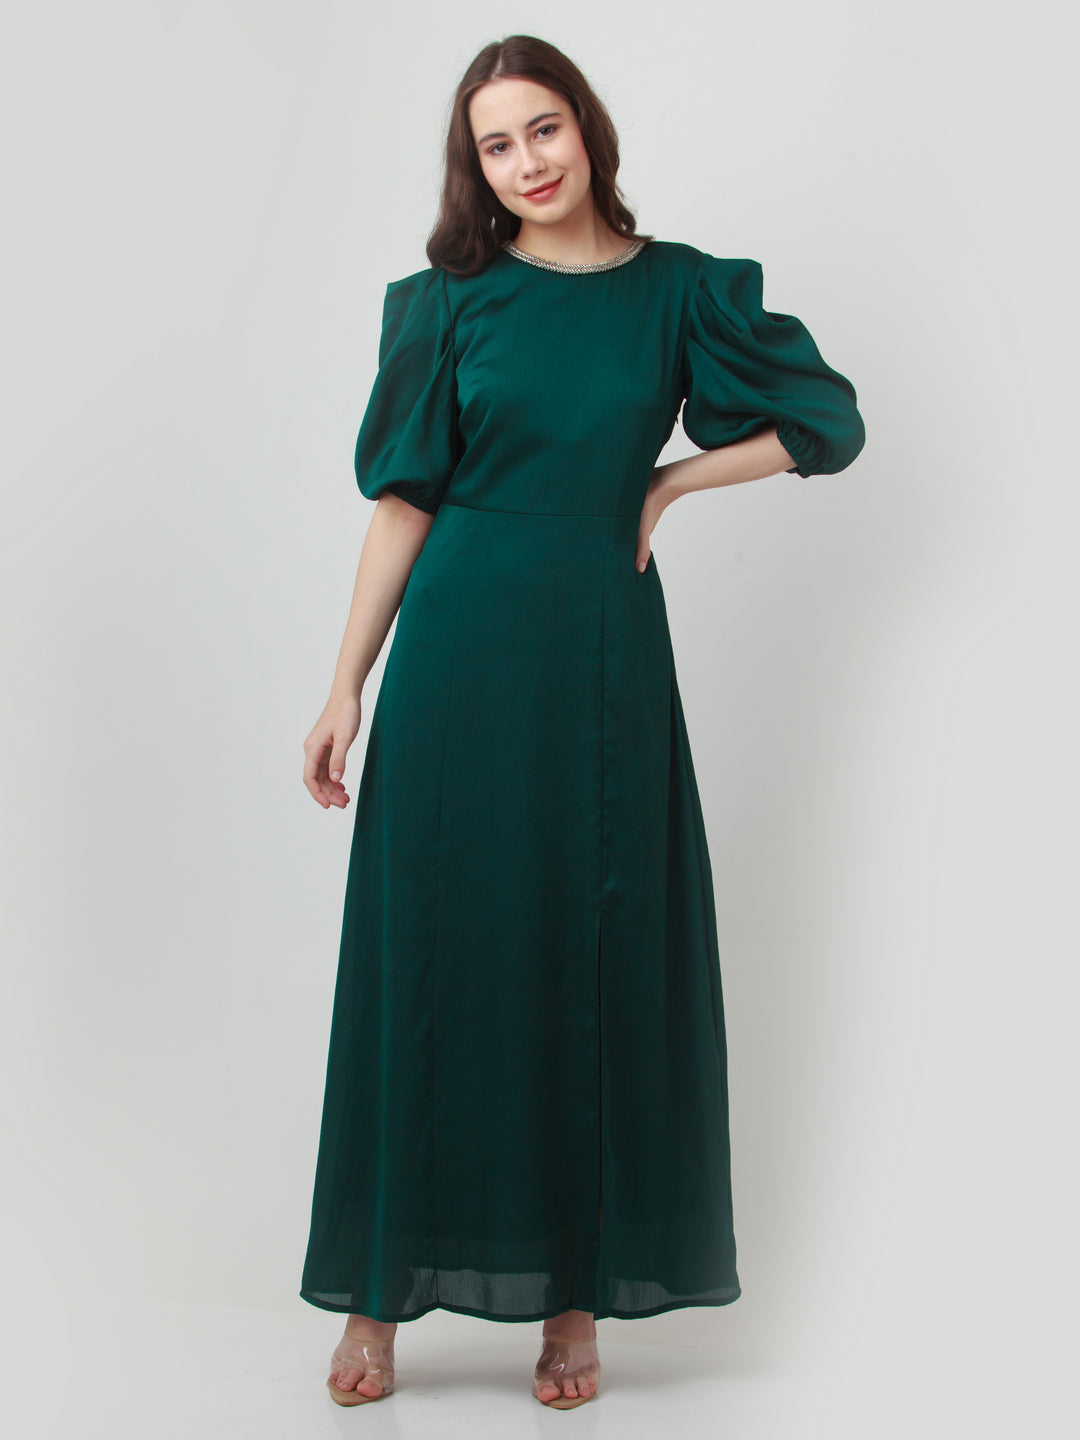 Green Solid Puff Sleeve Maxi Dress For Women